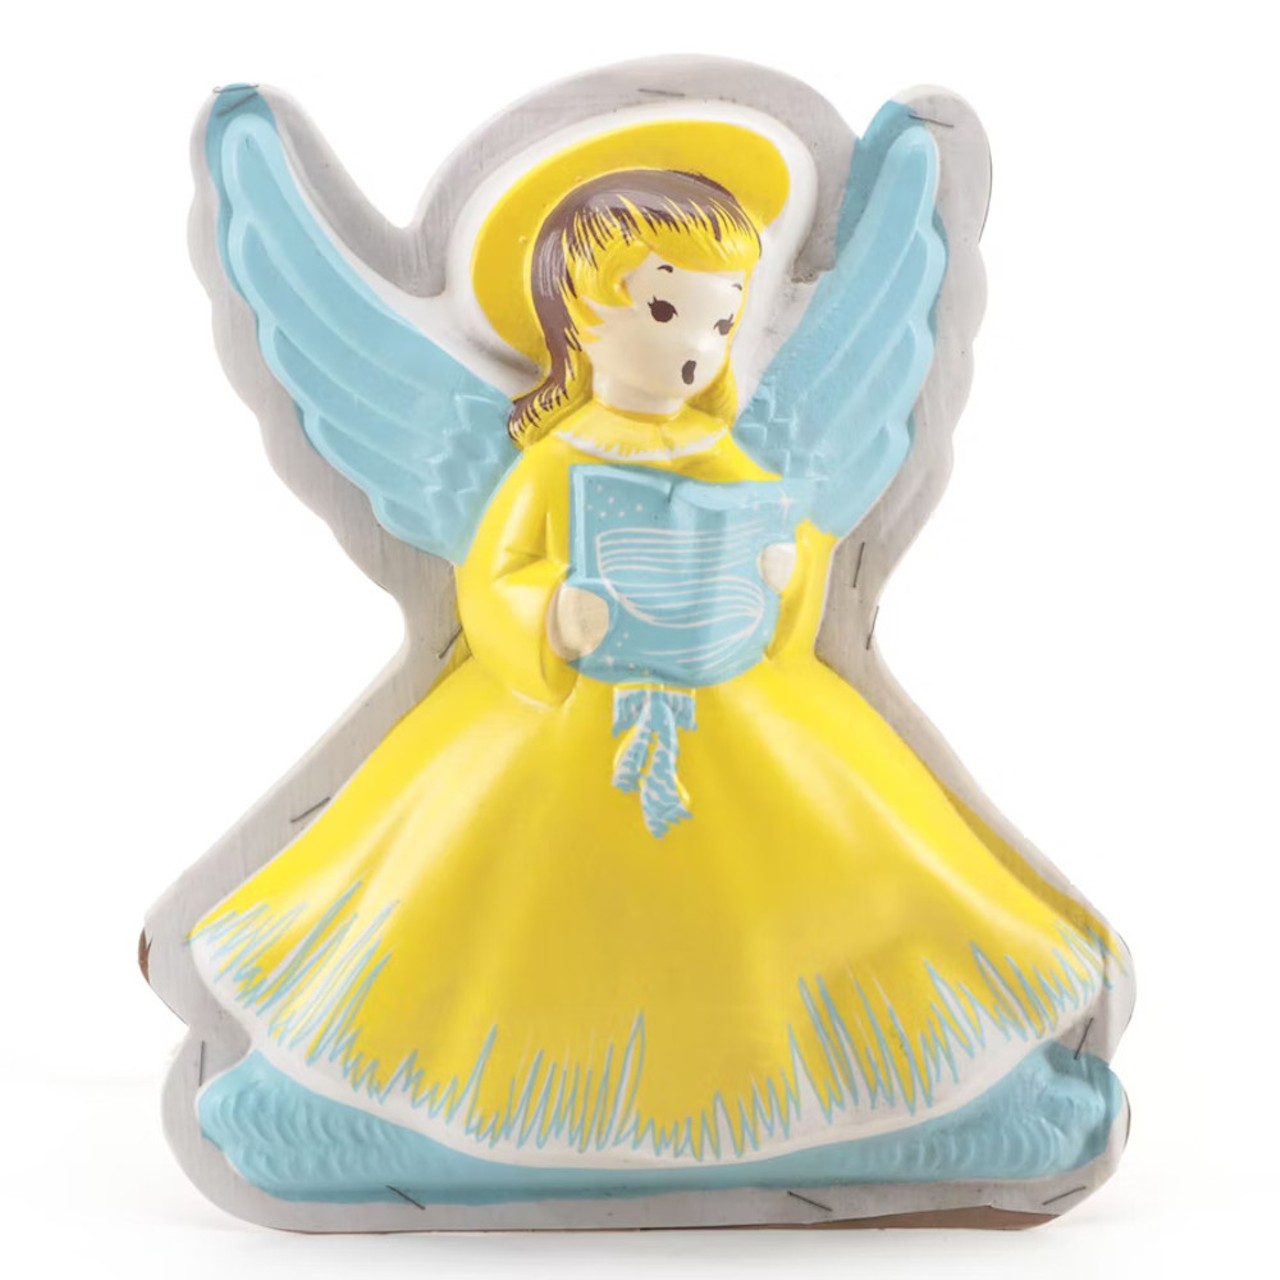 Timco Vacuum Formed Illuminated Angel Wall Decor
Holiday decor is an underrated gift, especially hard-to-find retro pieces like this Timco vacuum-formed illuminated angel. It’s perfect for those on your list with a taste for the old-timey Christmas vibe. Pair with a string of oversized colored light bulbs for the perfect window display gift set.